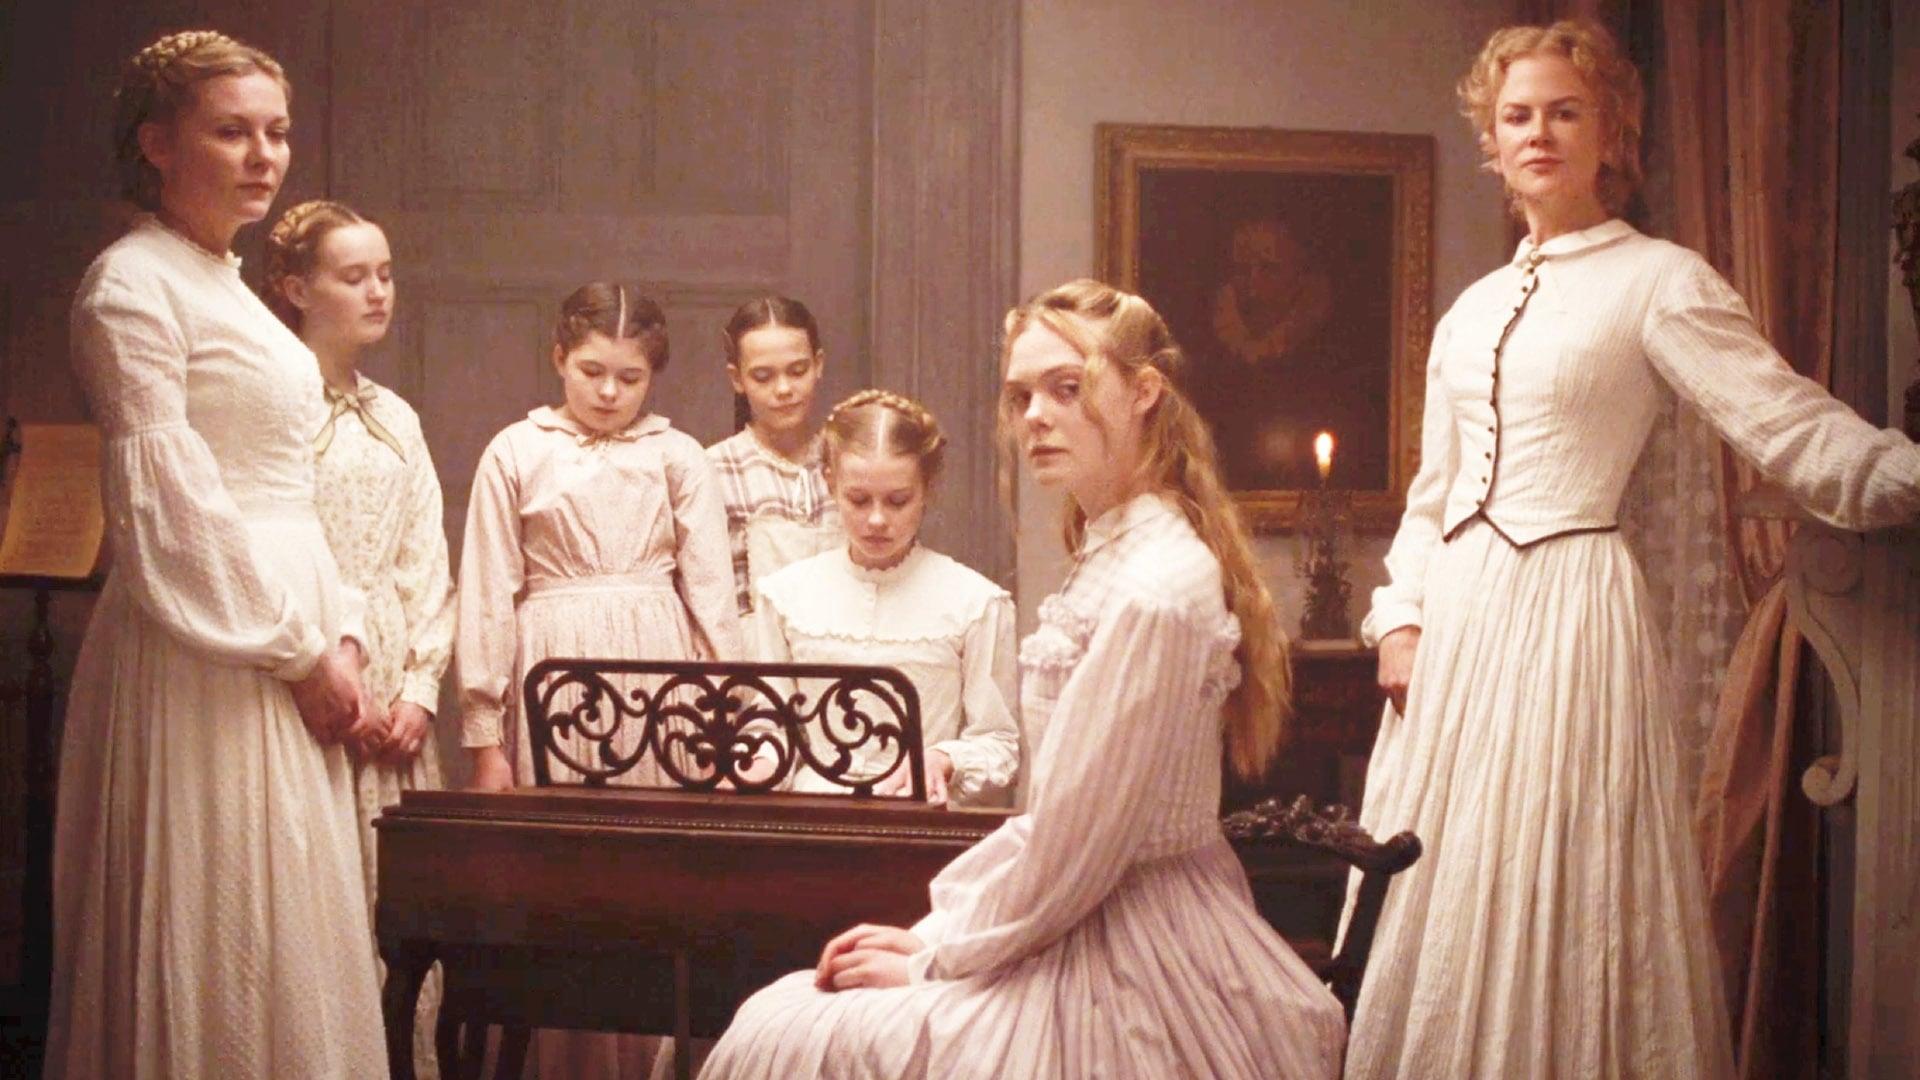 The Beguiled backdrop